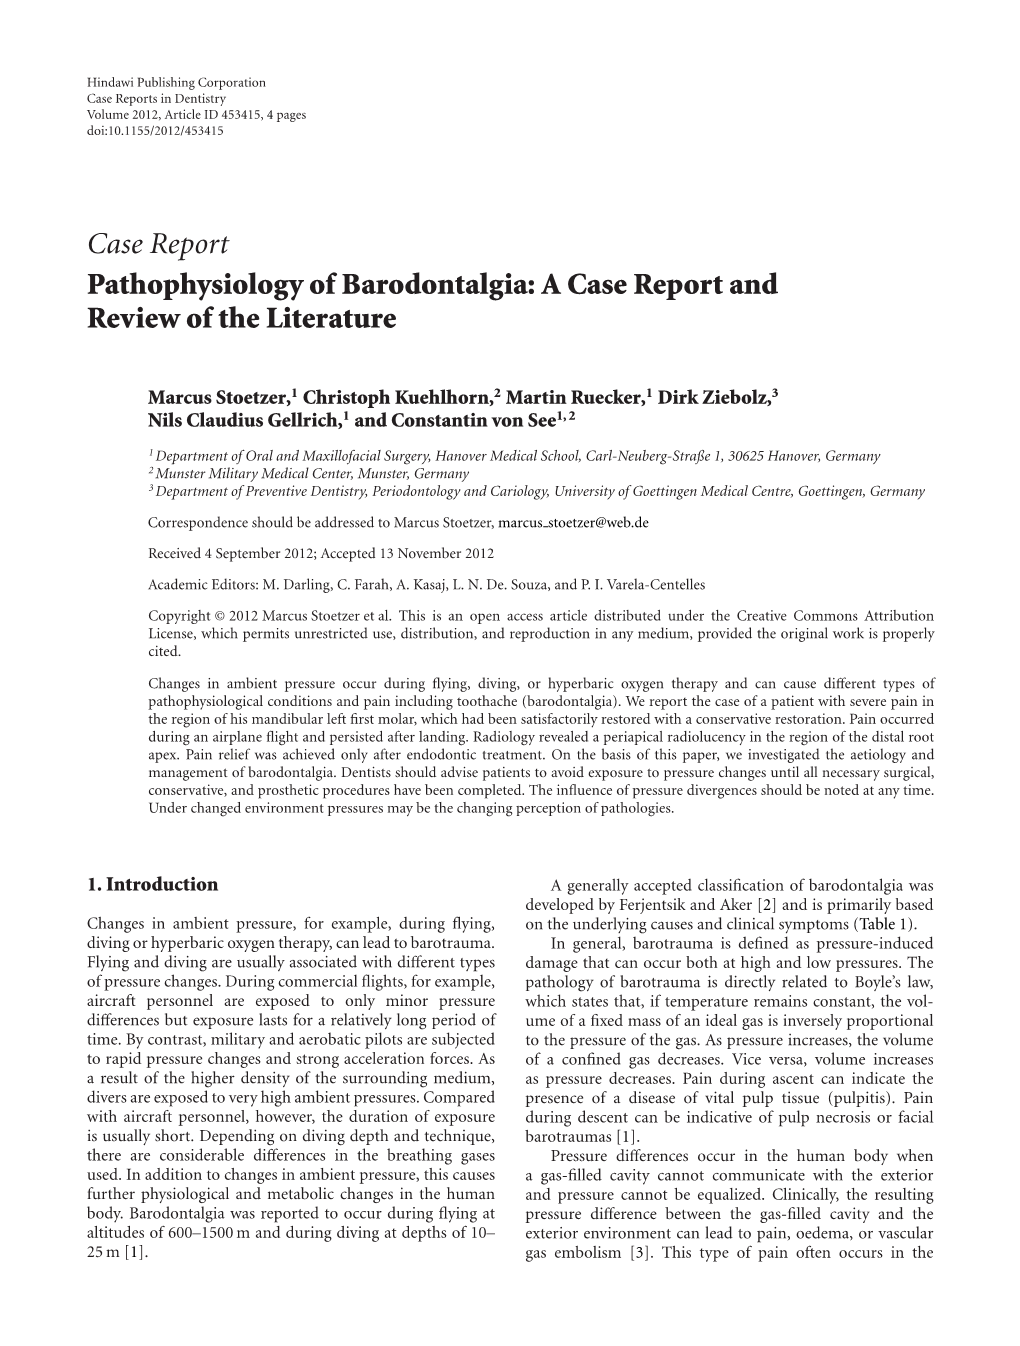 Pathophysiology of Barodontalgia: a Case Report and Review of the Literature